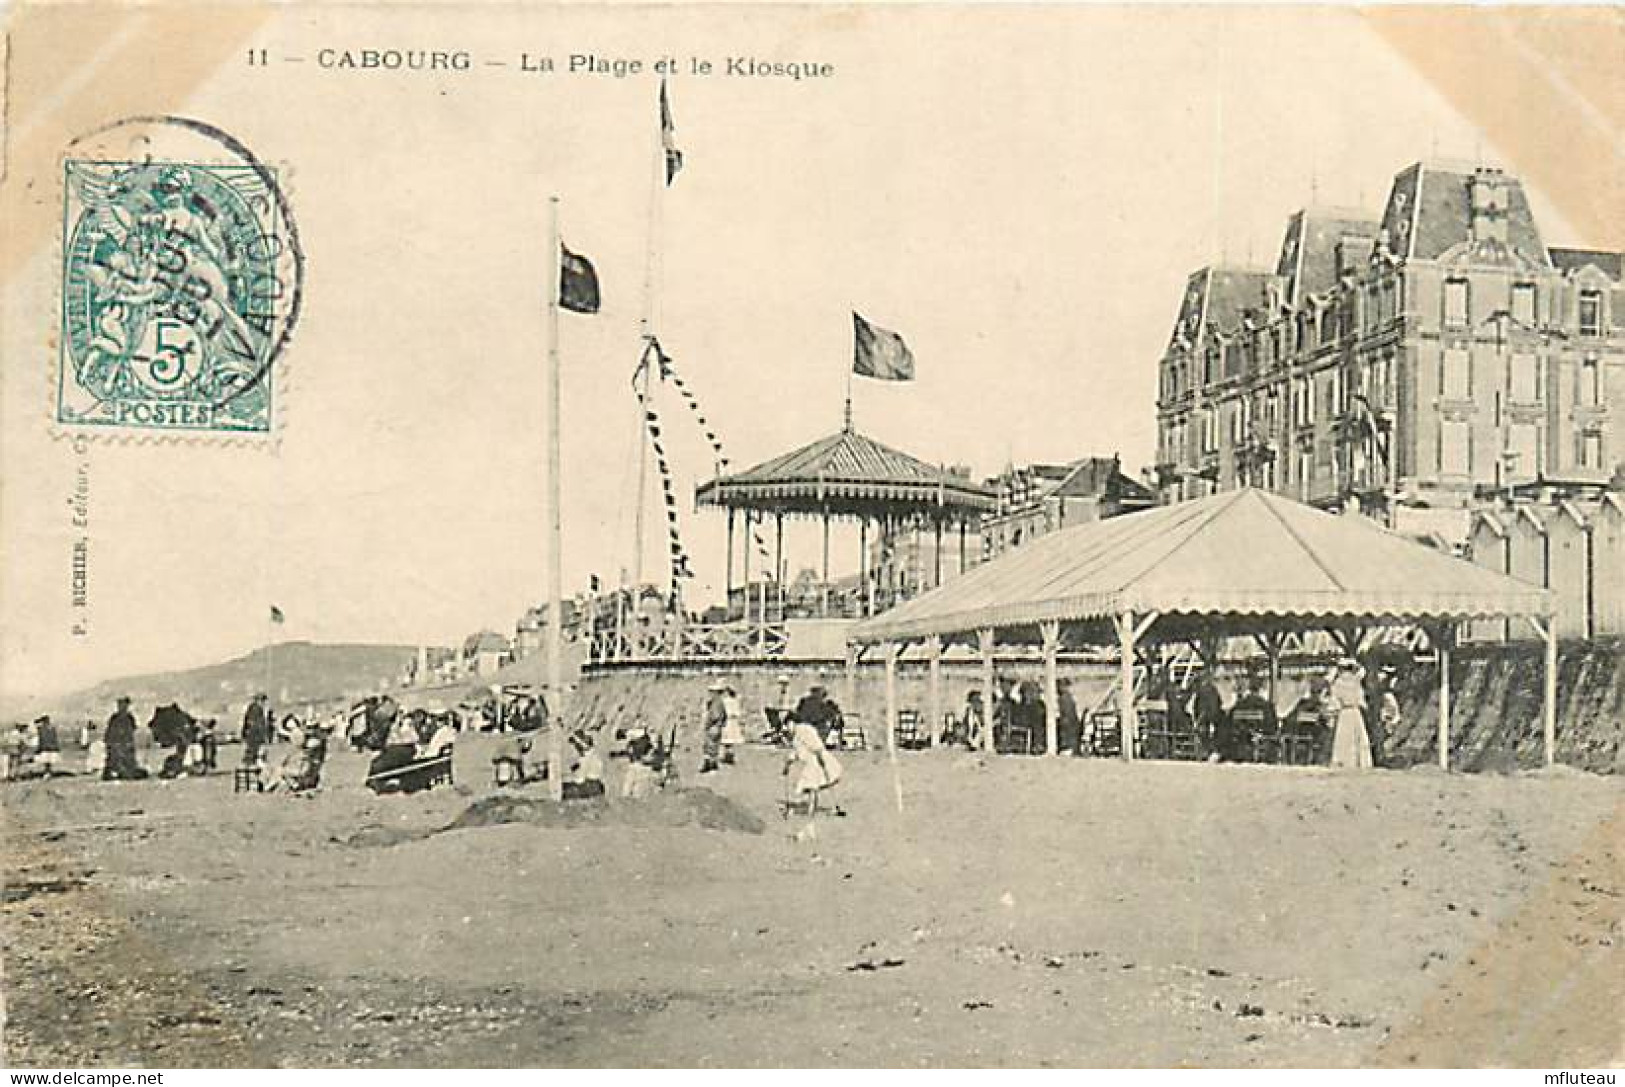 14* CABOURG Plage – Kiosque           MA99,1523 - Cabourg